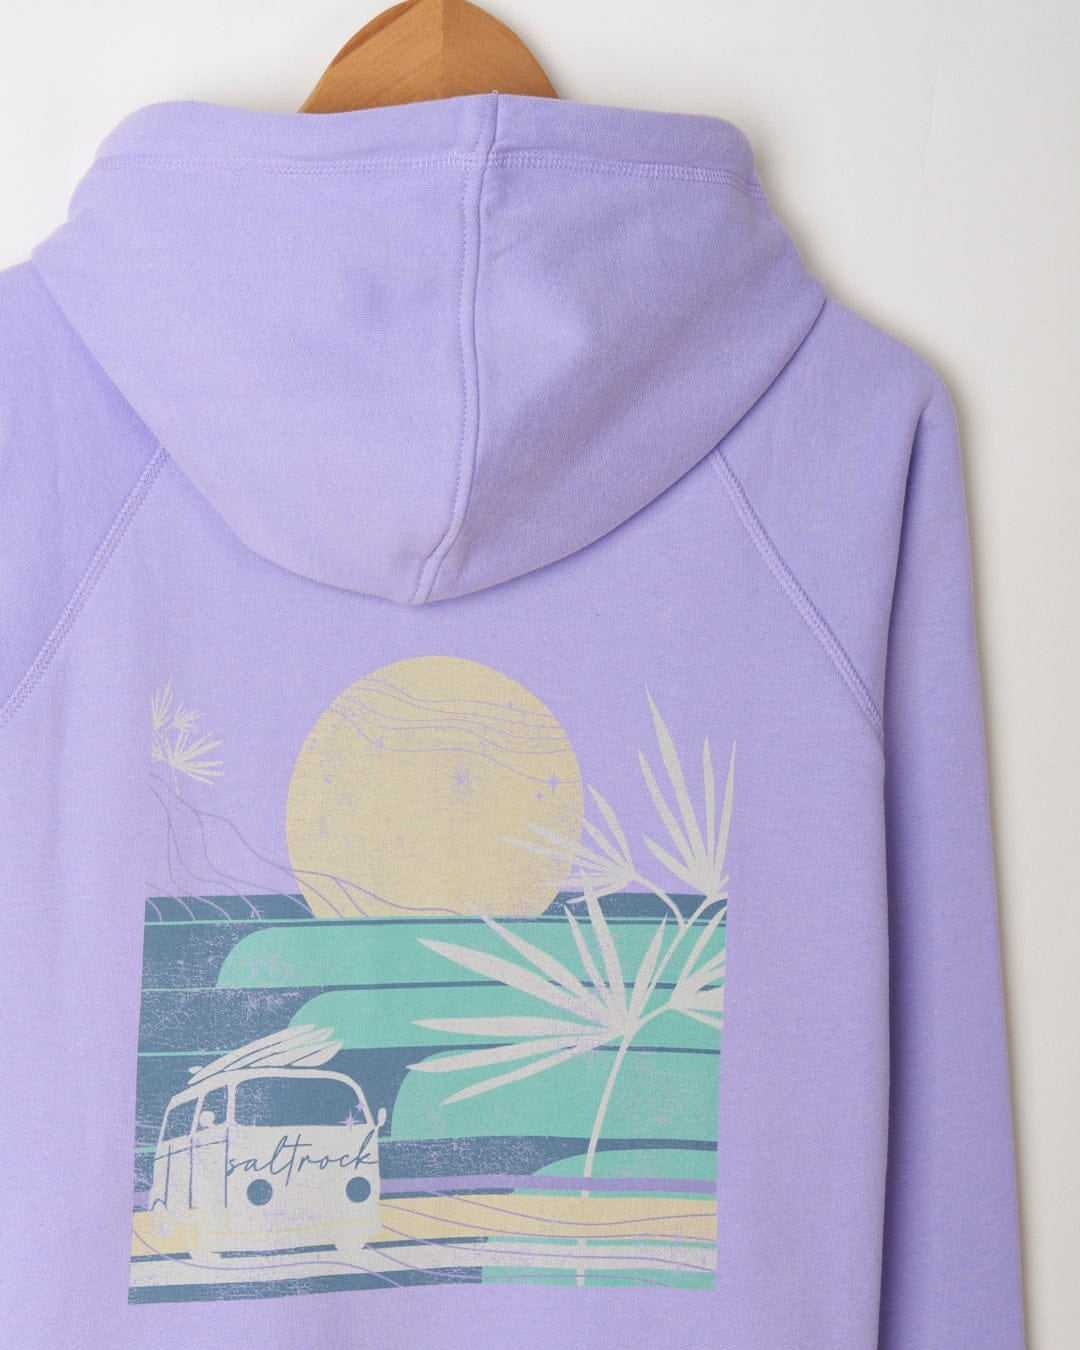 Saltrock women's zip through hoodie in Lilac Purple with Poster style surf print on the back.